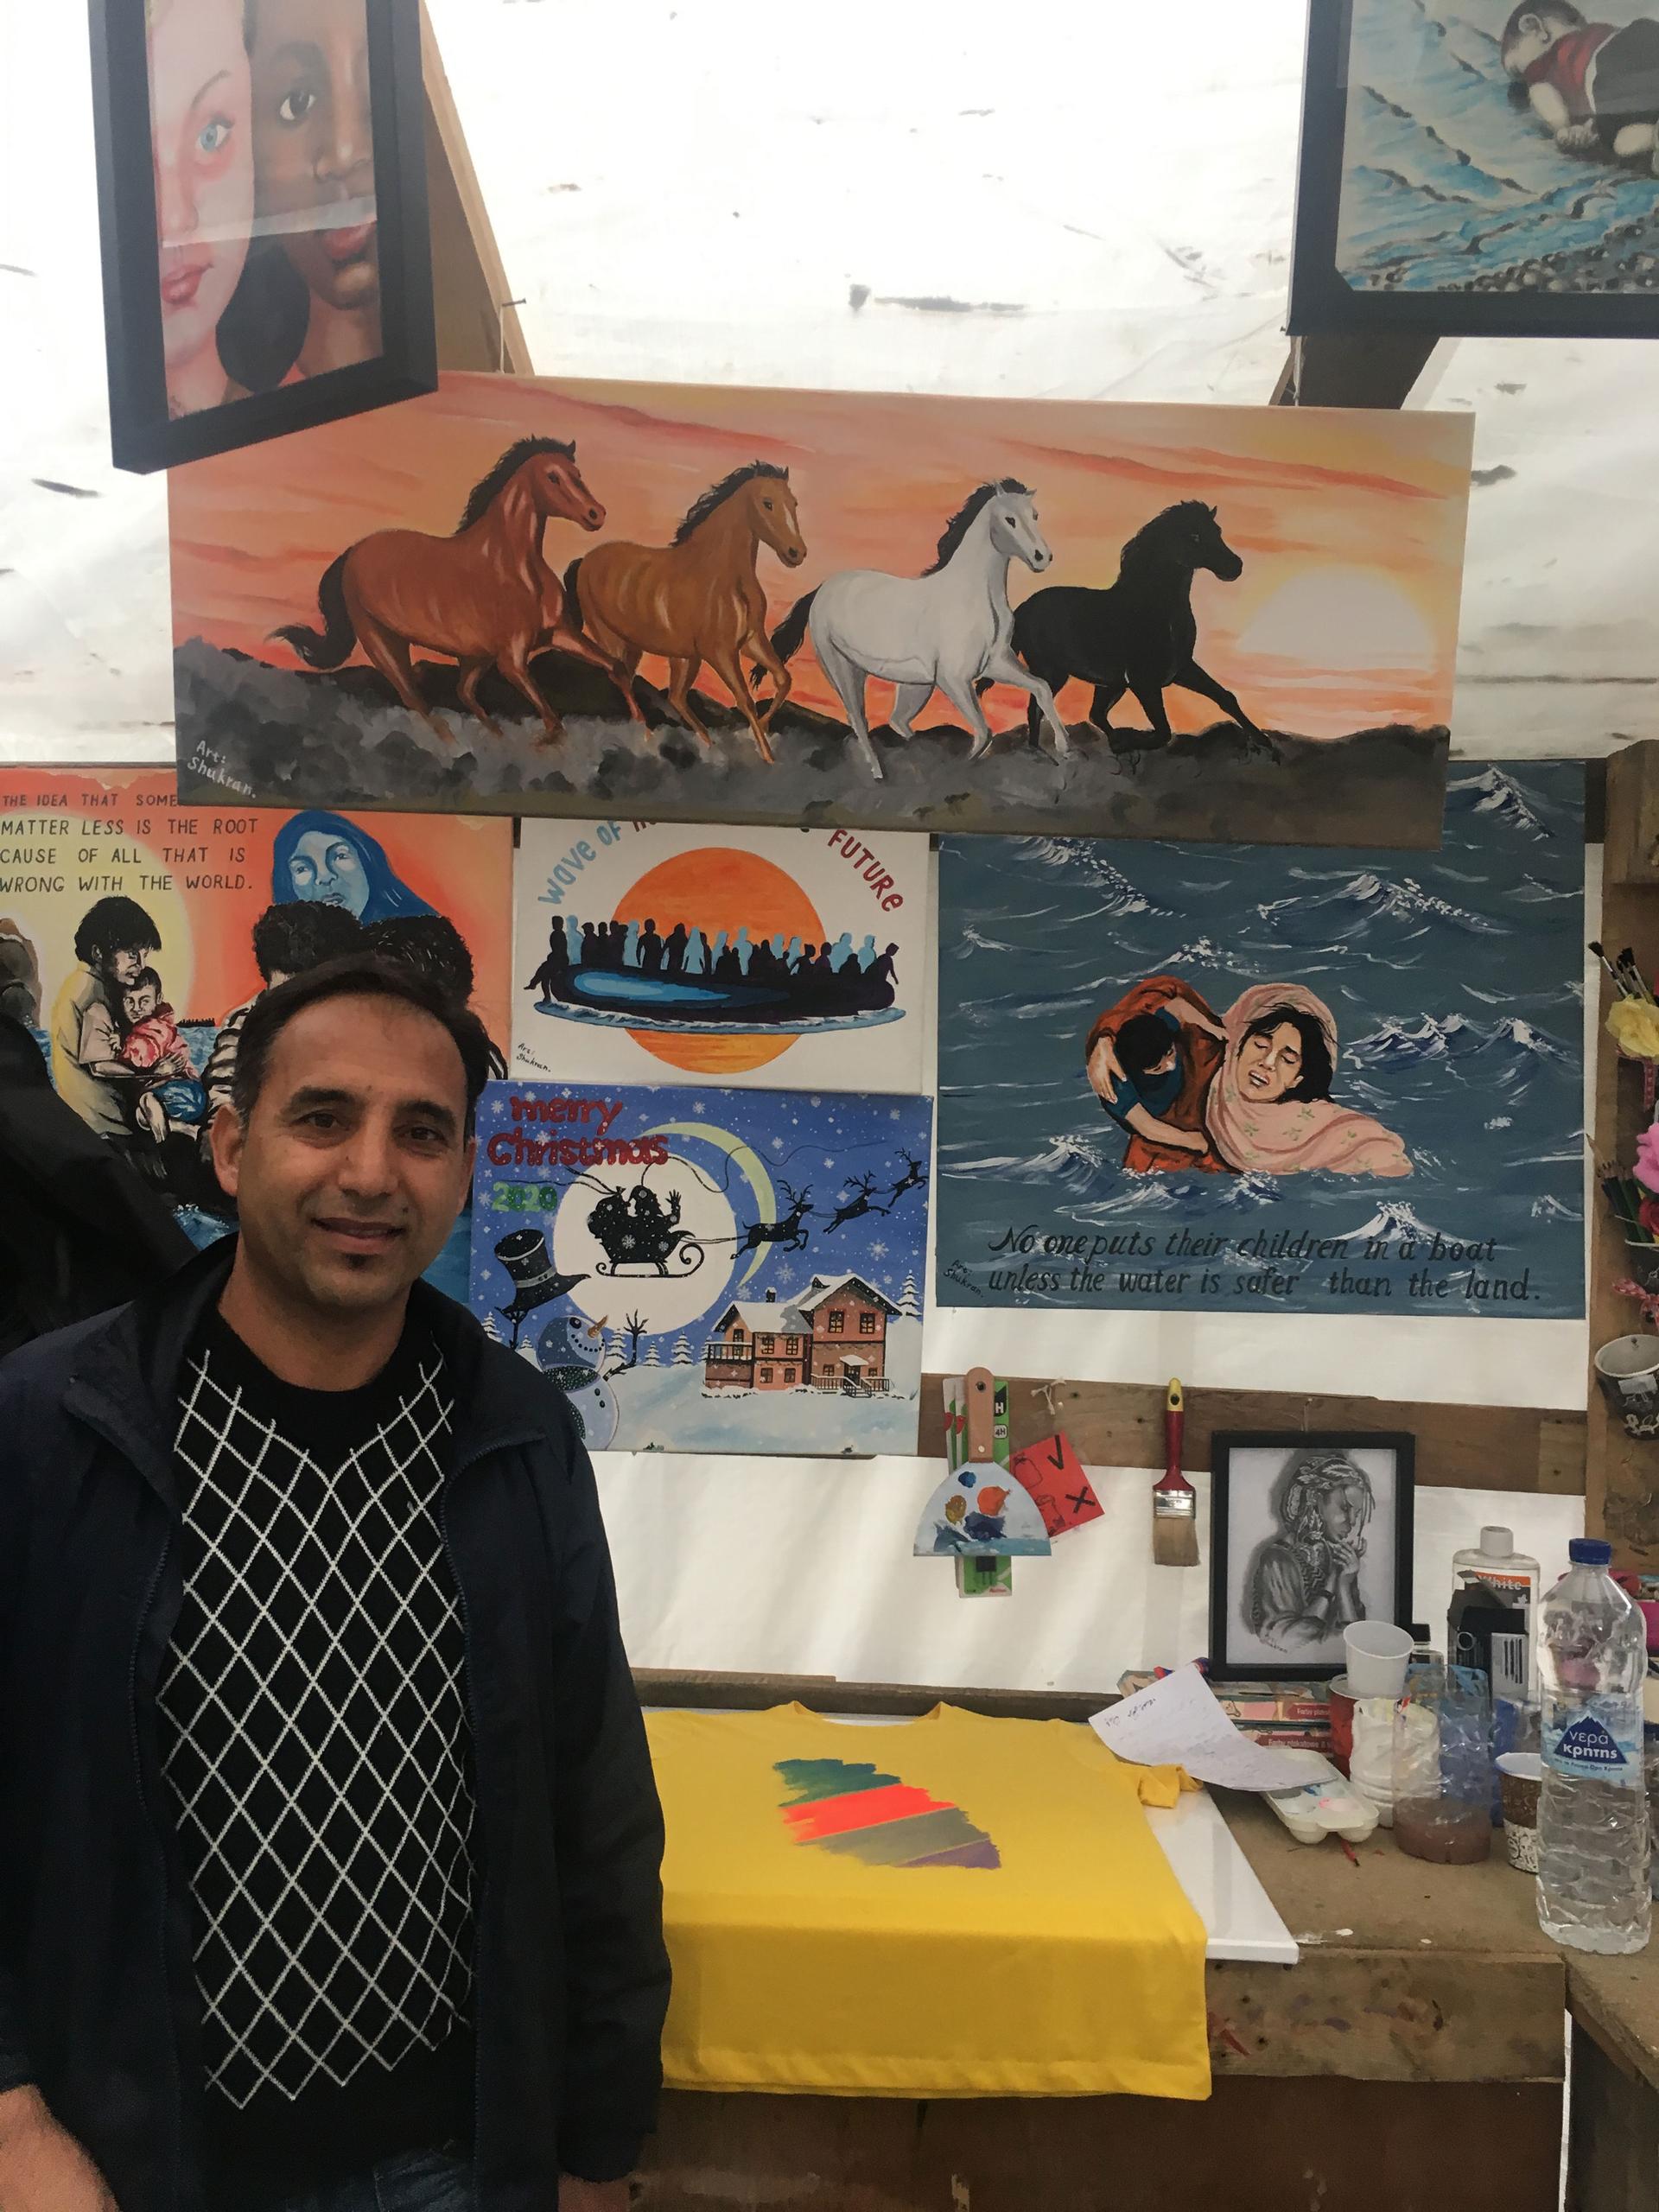 A man is shown standing in front of several pieces of art work including an illustration of four horses running.